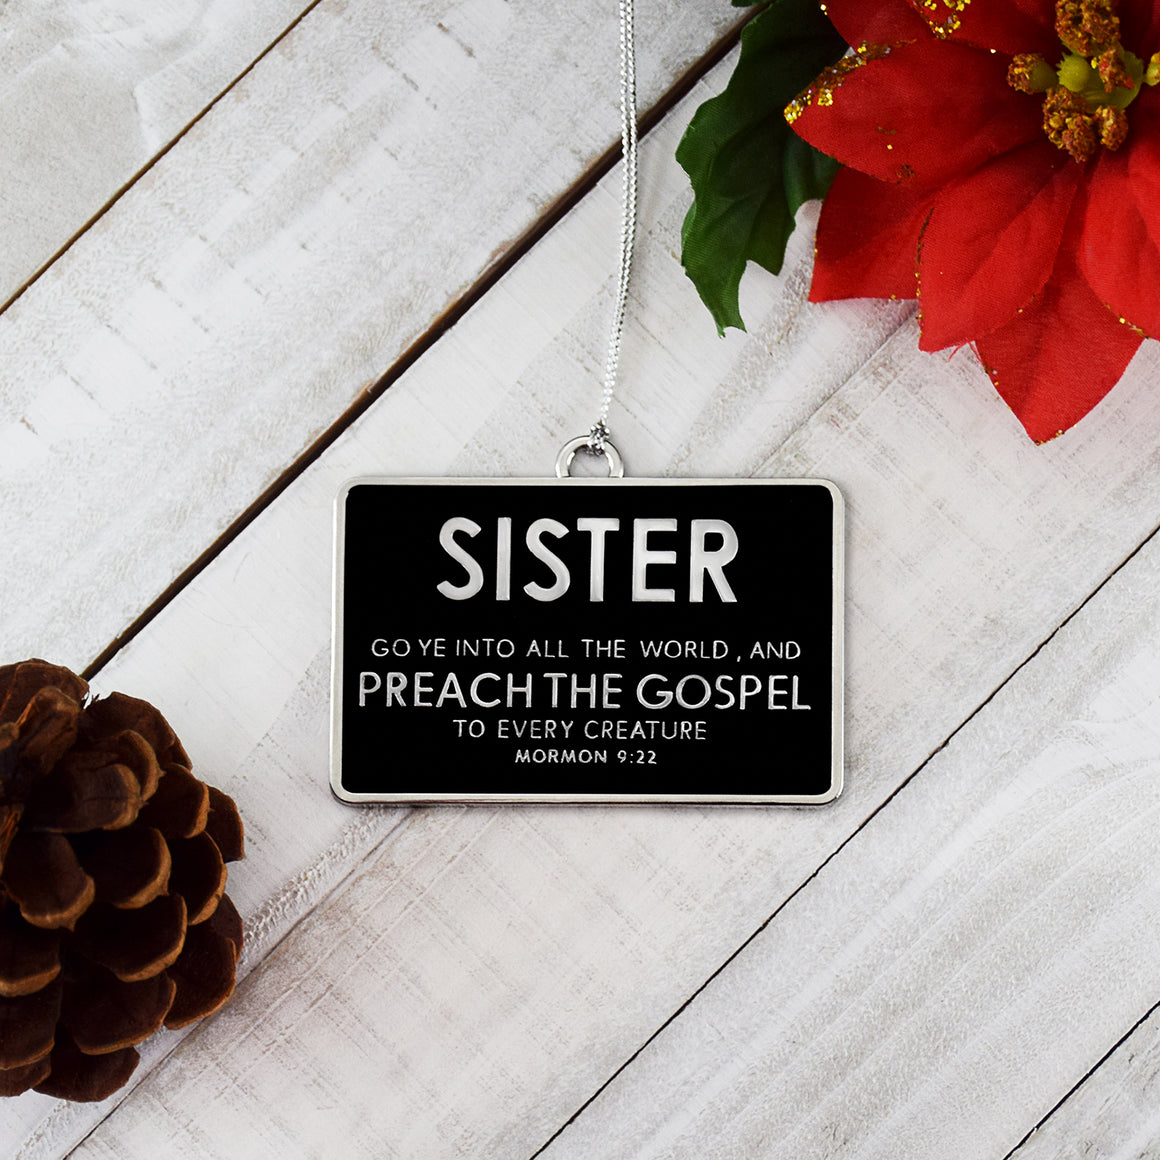 Sister Missionary Name Tag Silver Ornament by Ringmasters